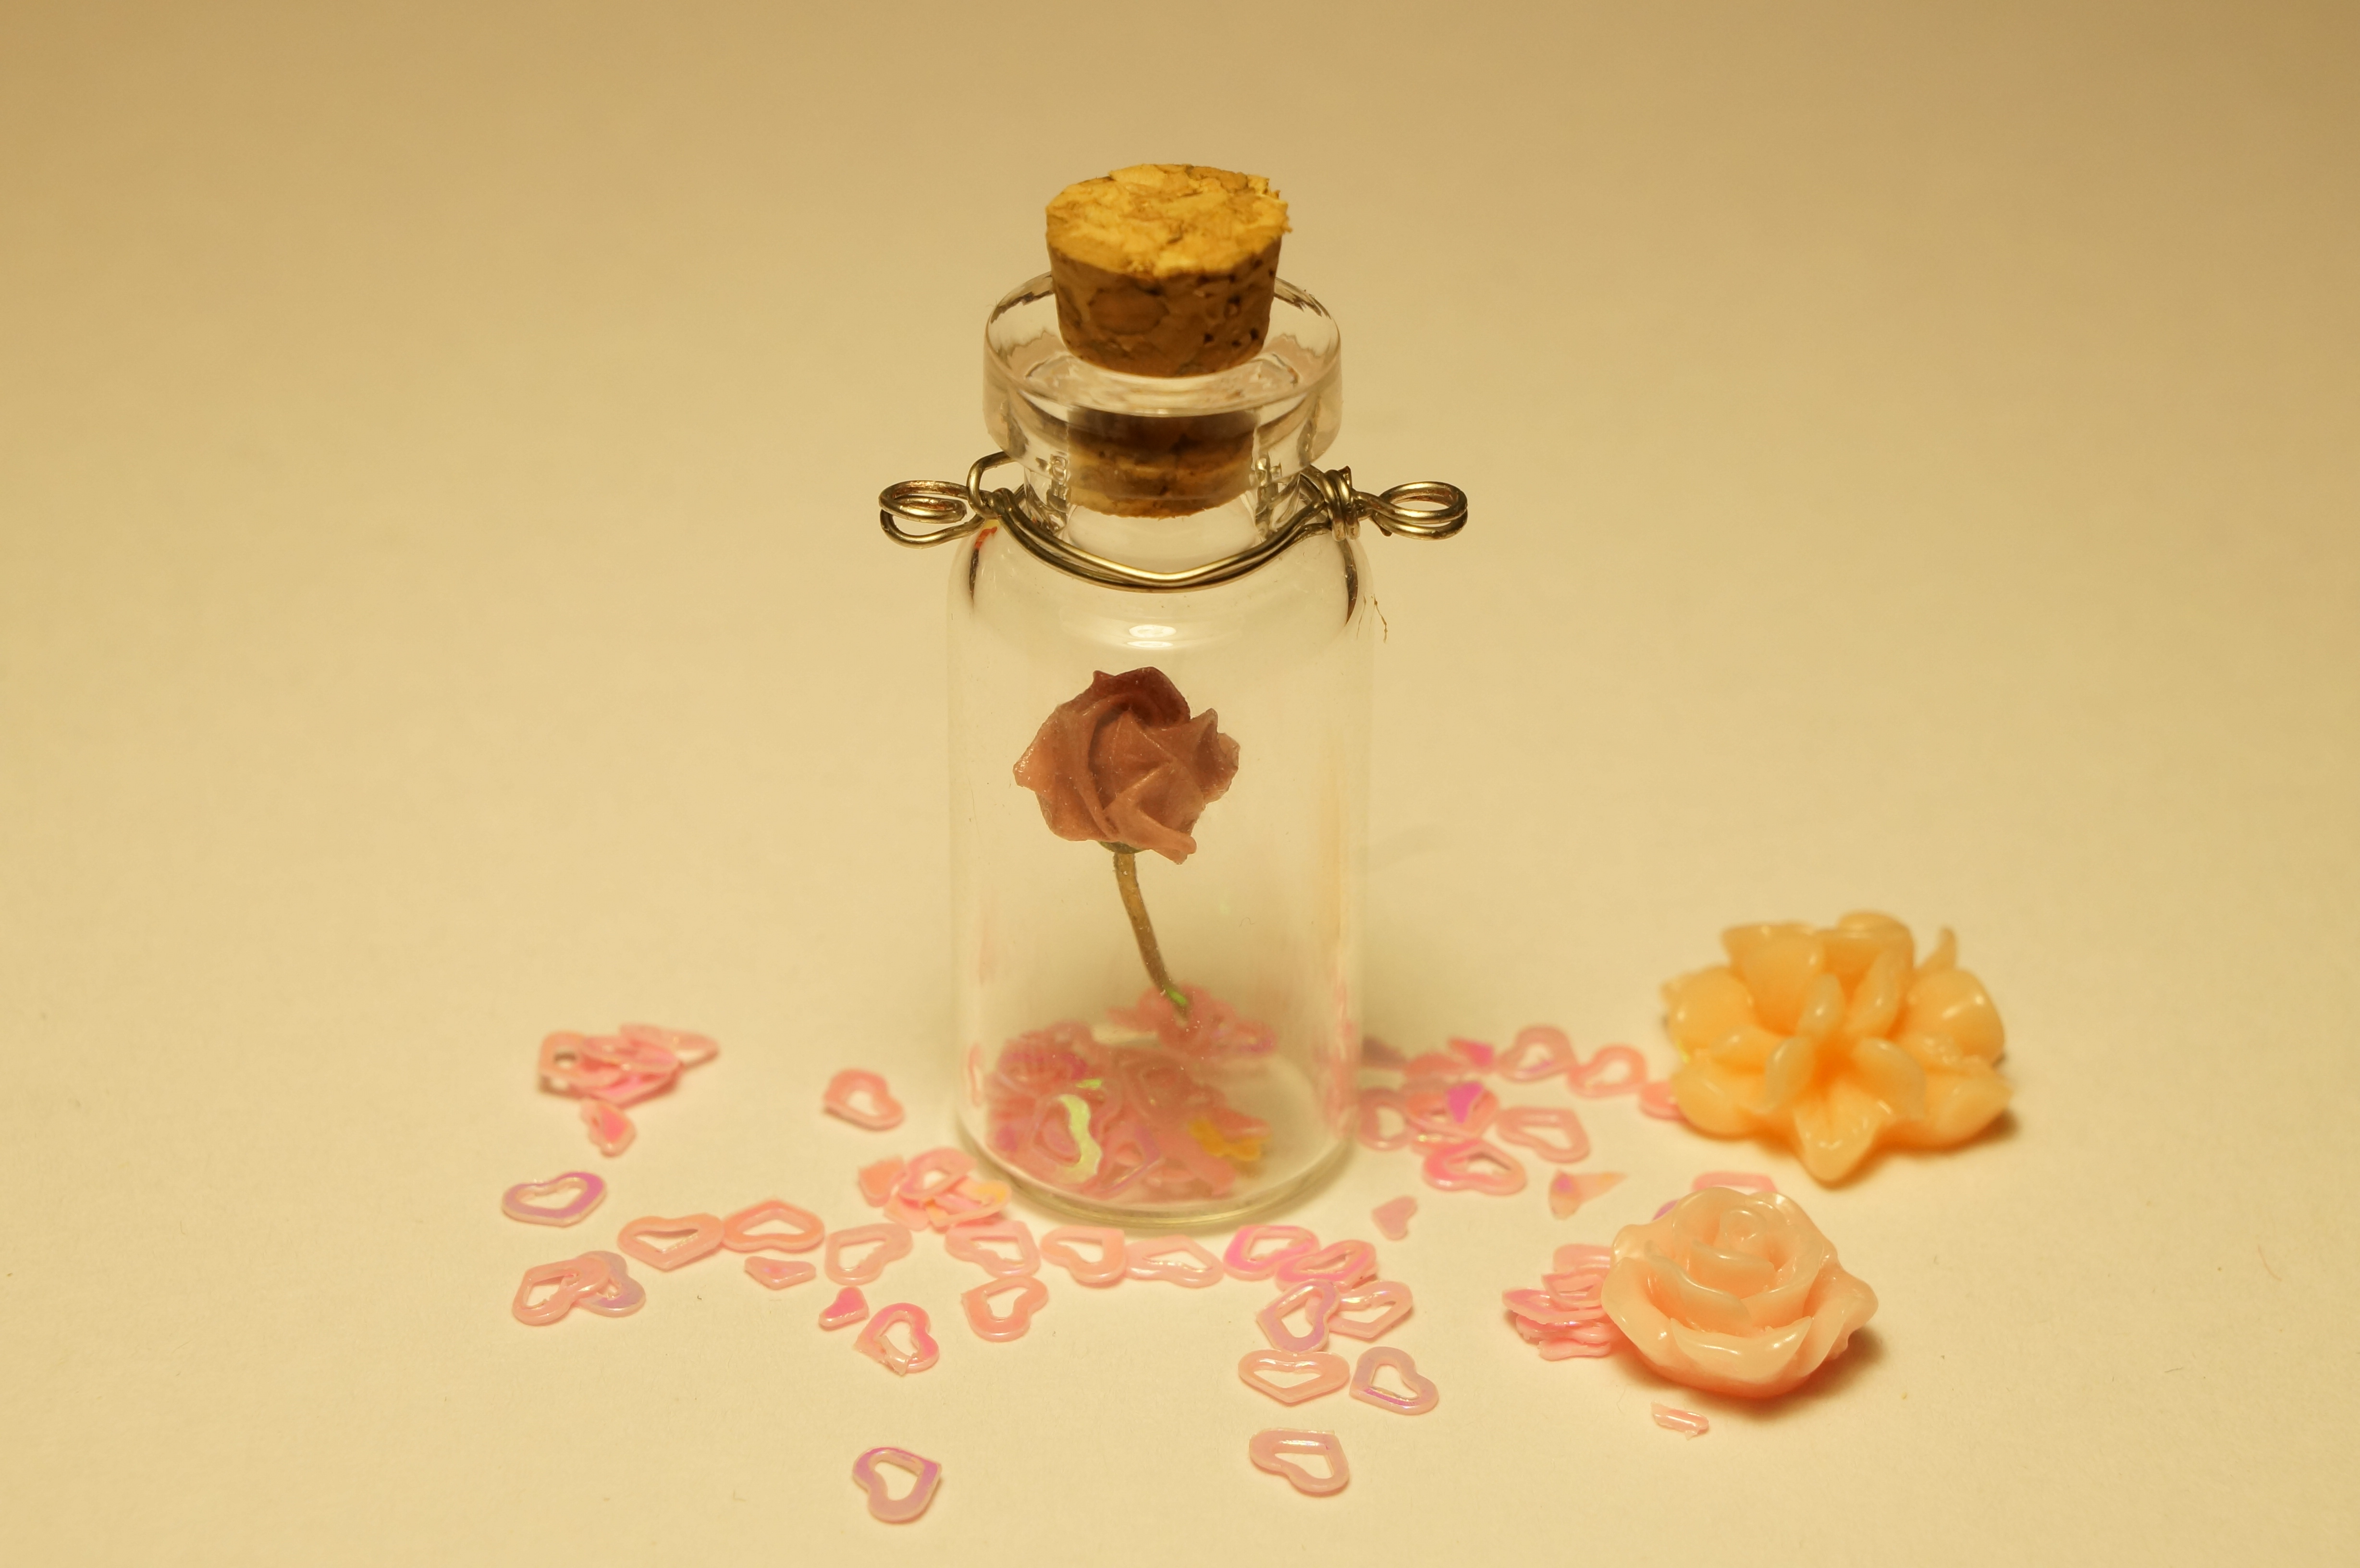 Origami Kawasaki Rose Miniature Origami Rose Necklace Purple Kawasaki Rose In A Glass Bottle Beauty And The Beast